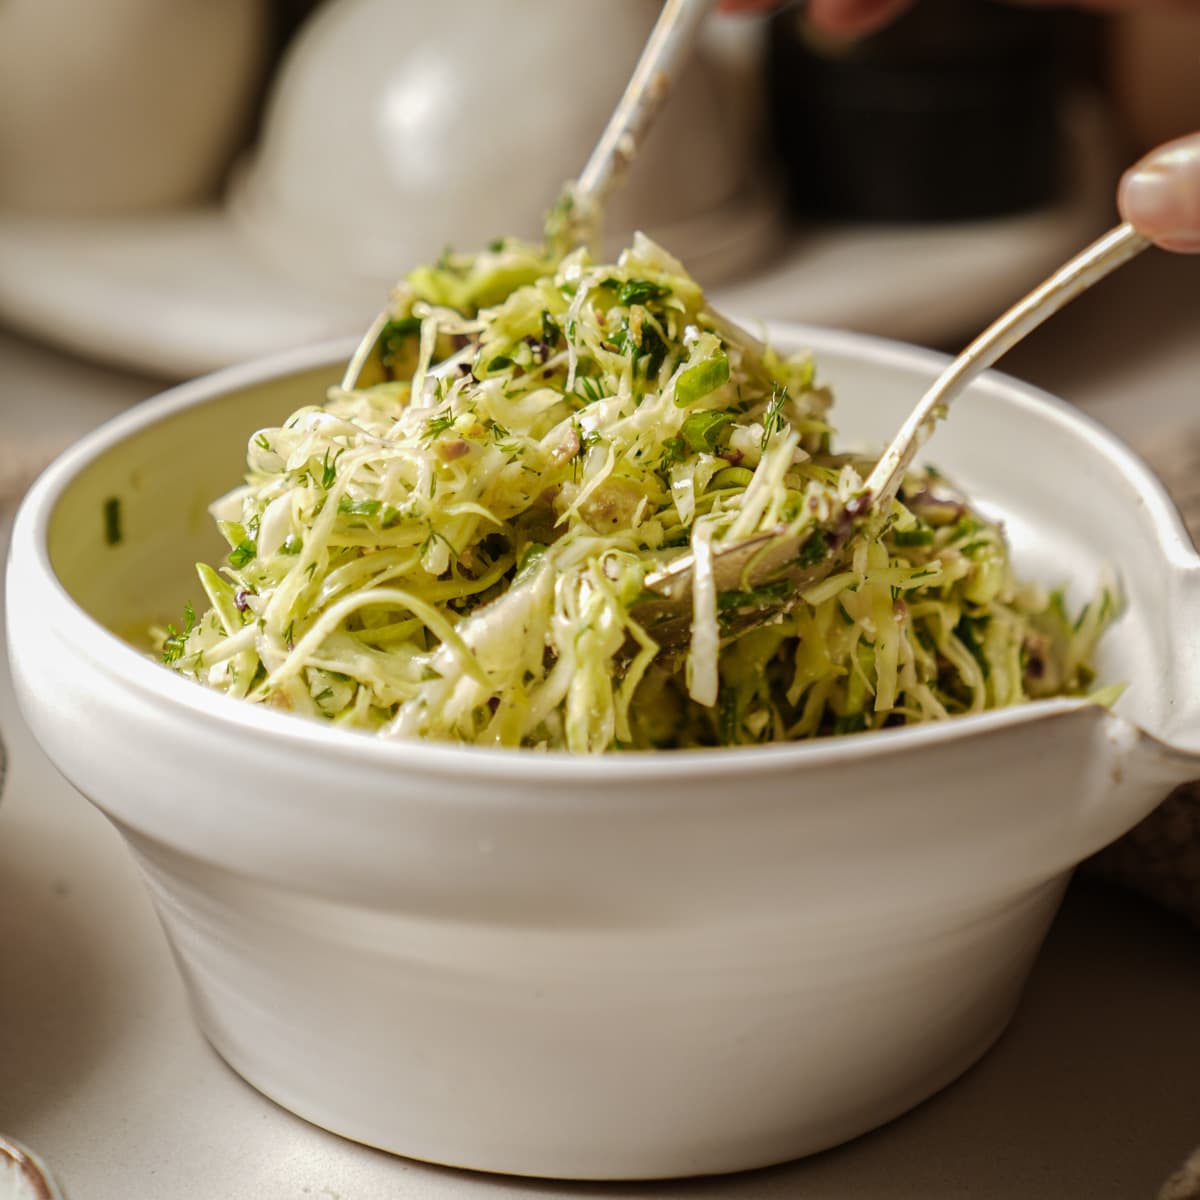 Bowl of Greek cabbage salad with serving spoons in it